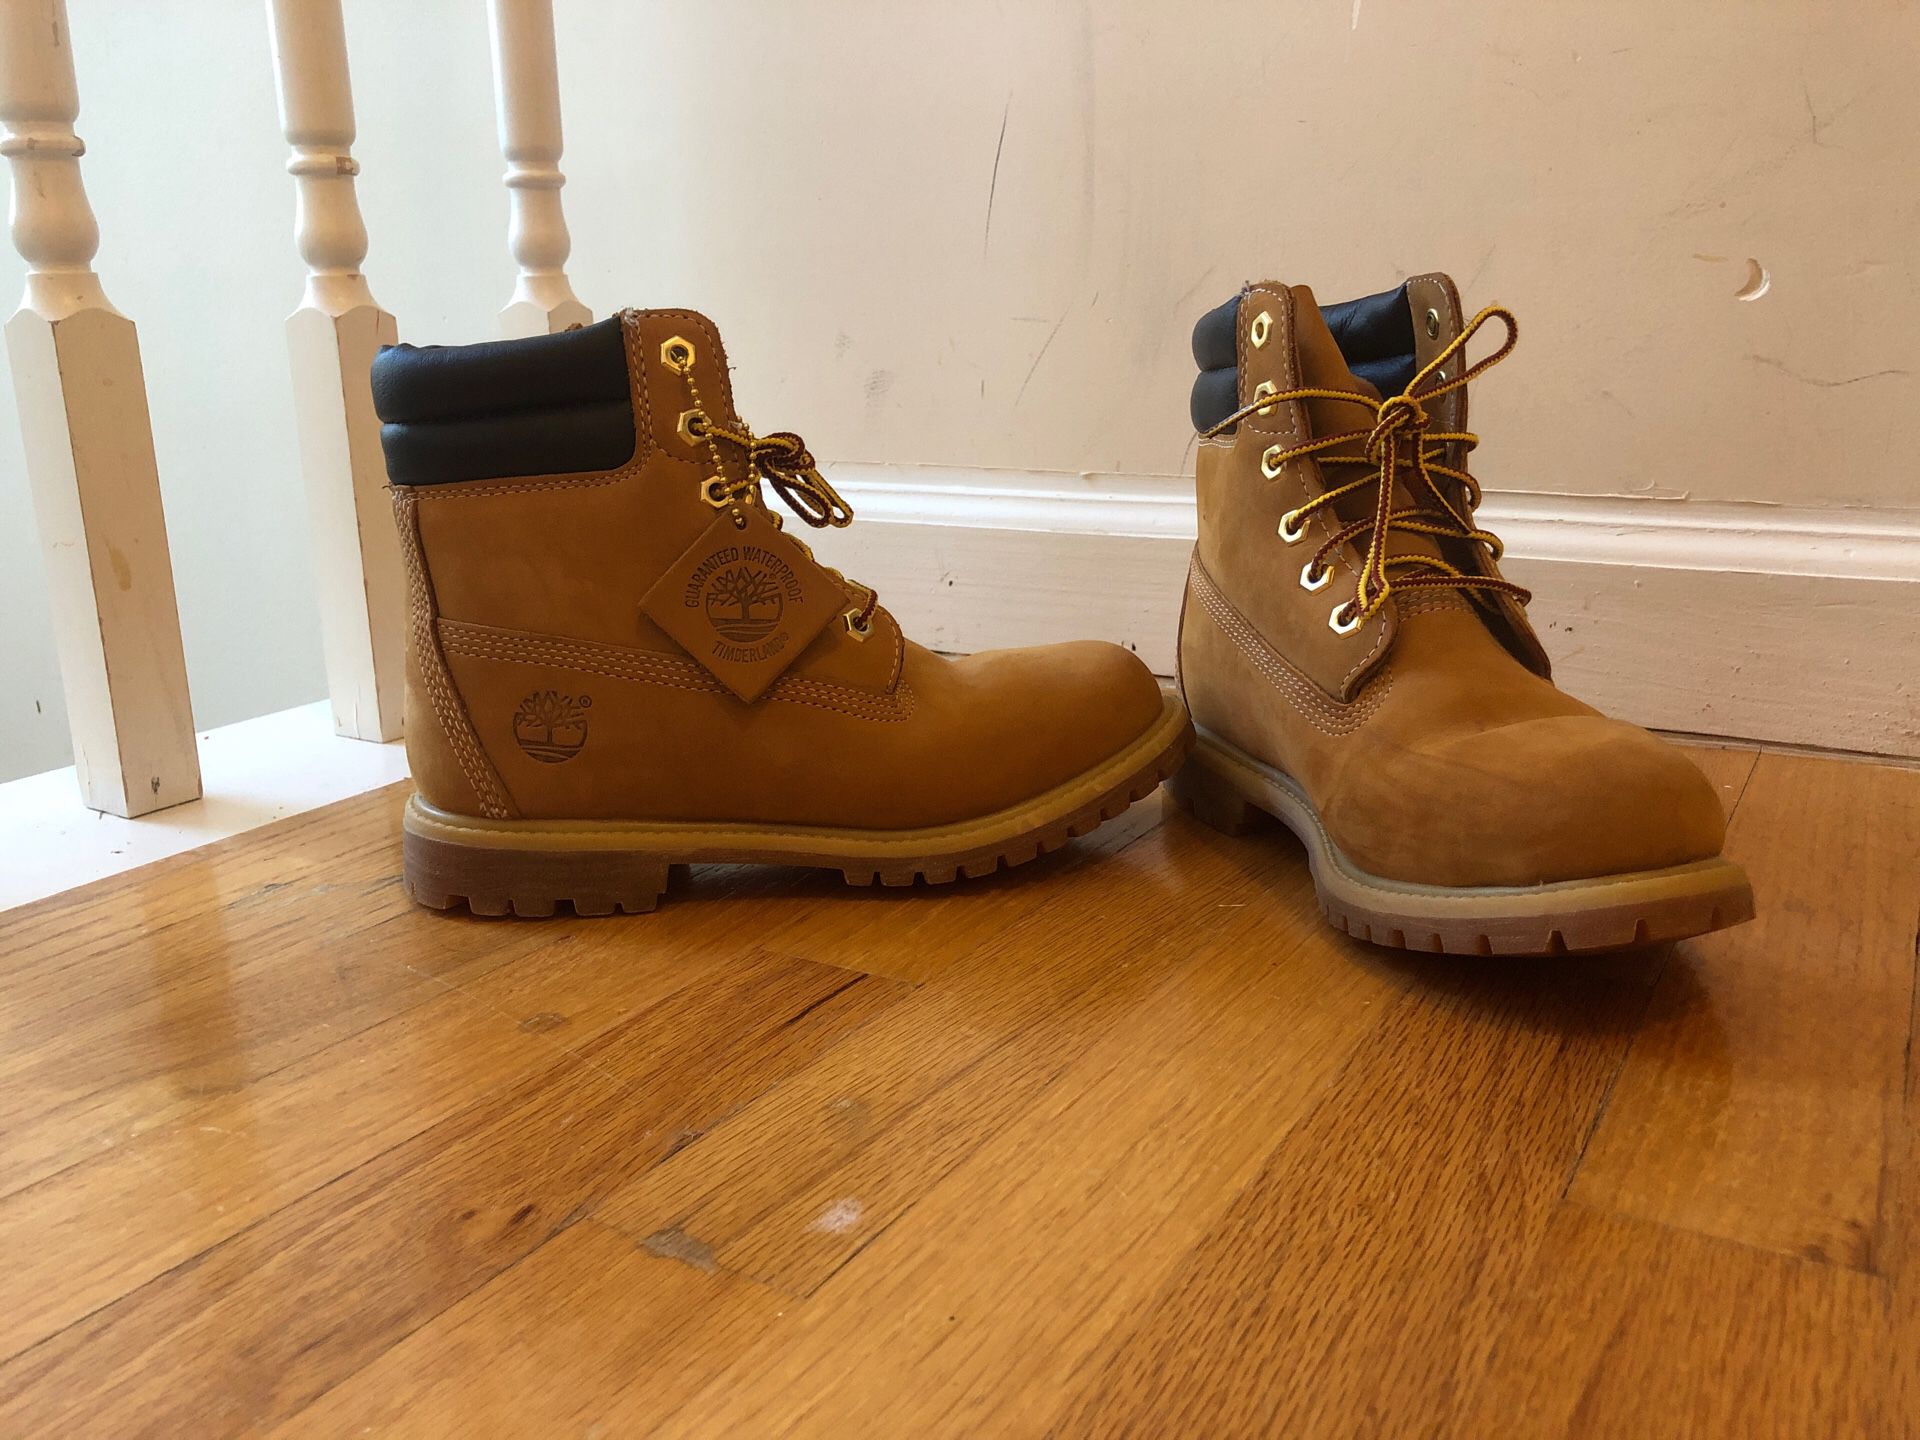 Timberlands Woman’s size 7